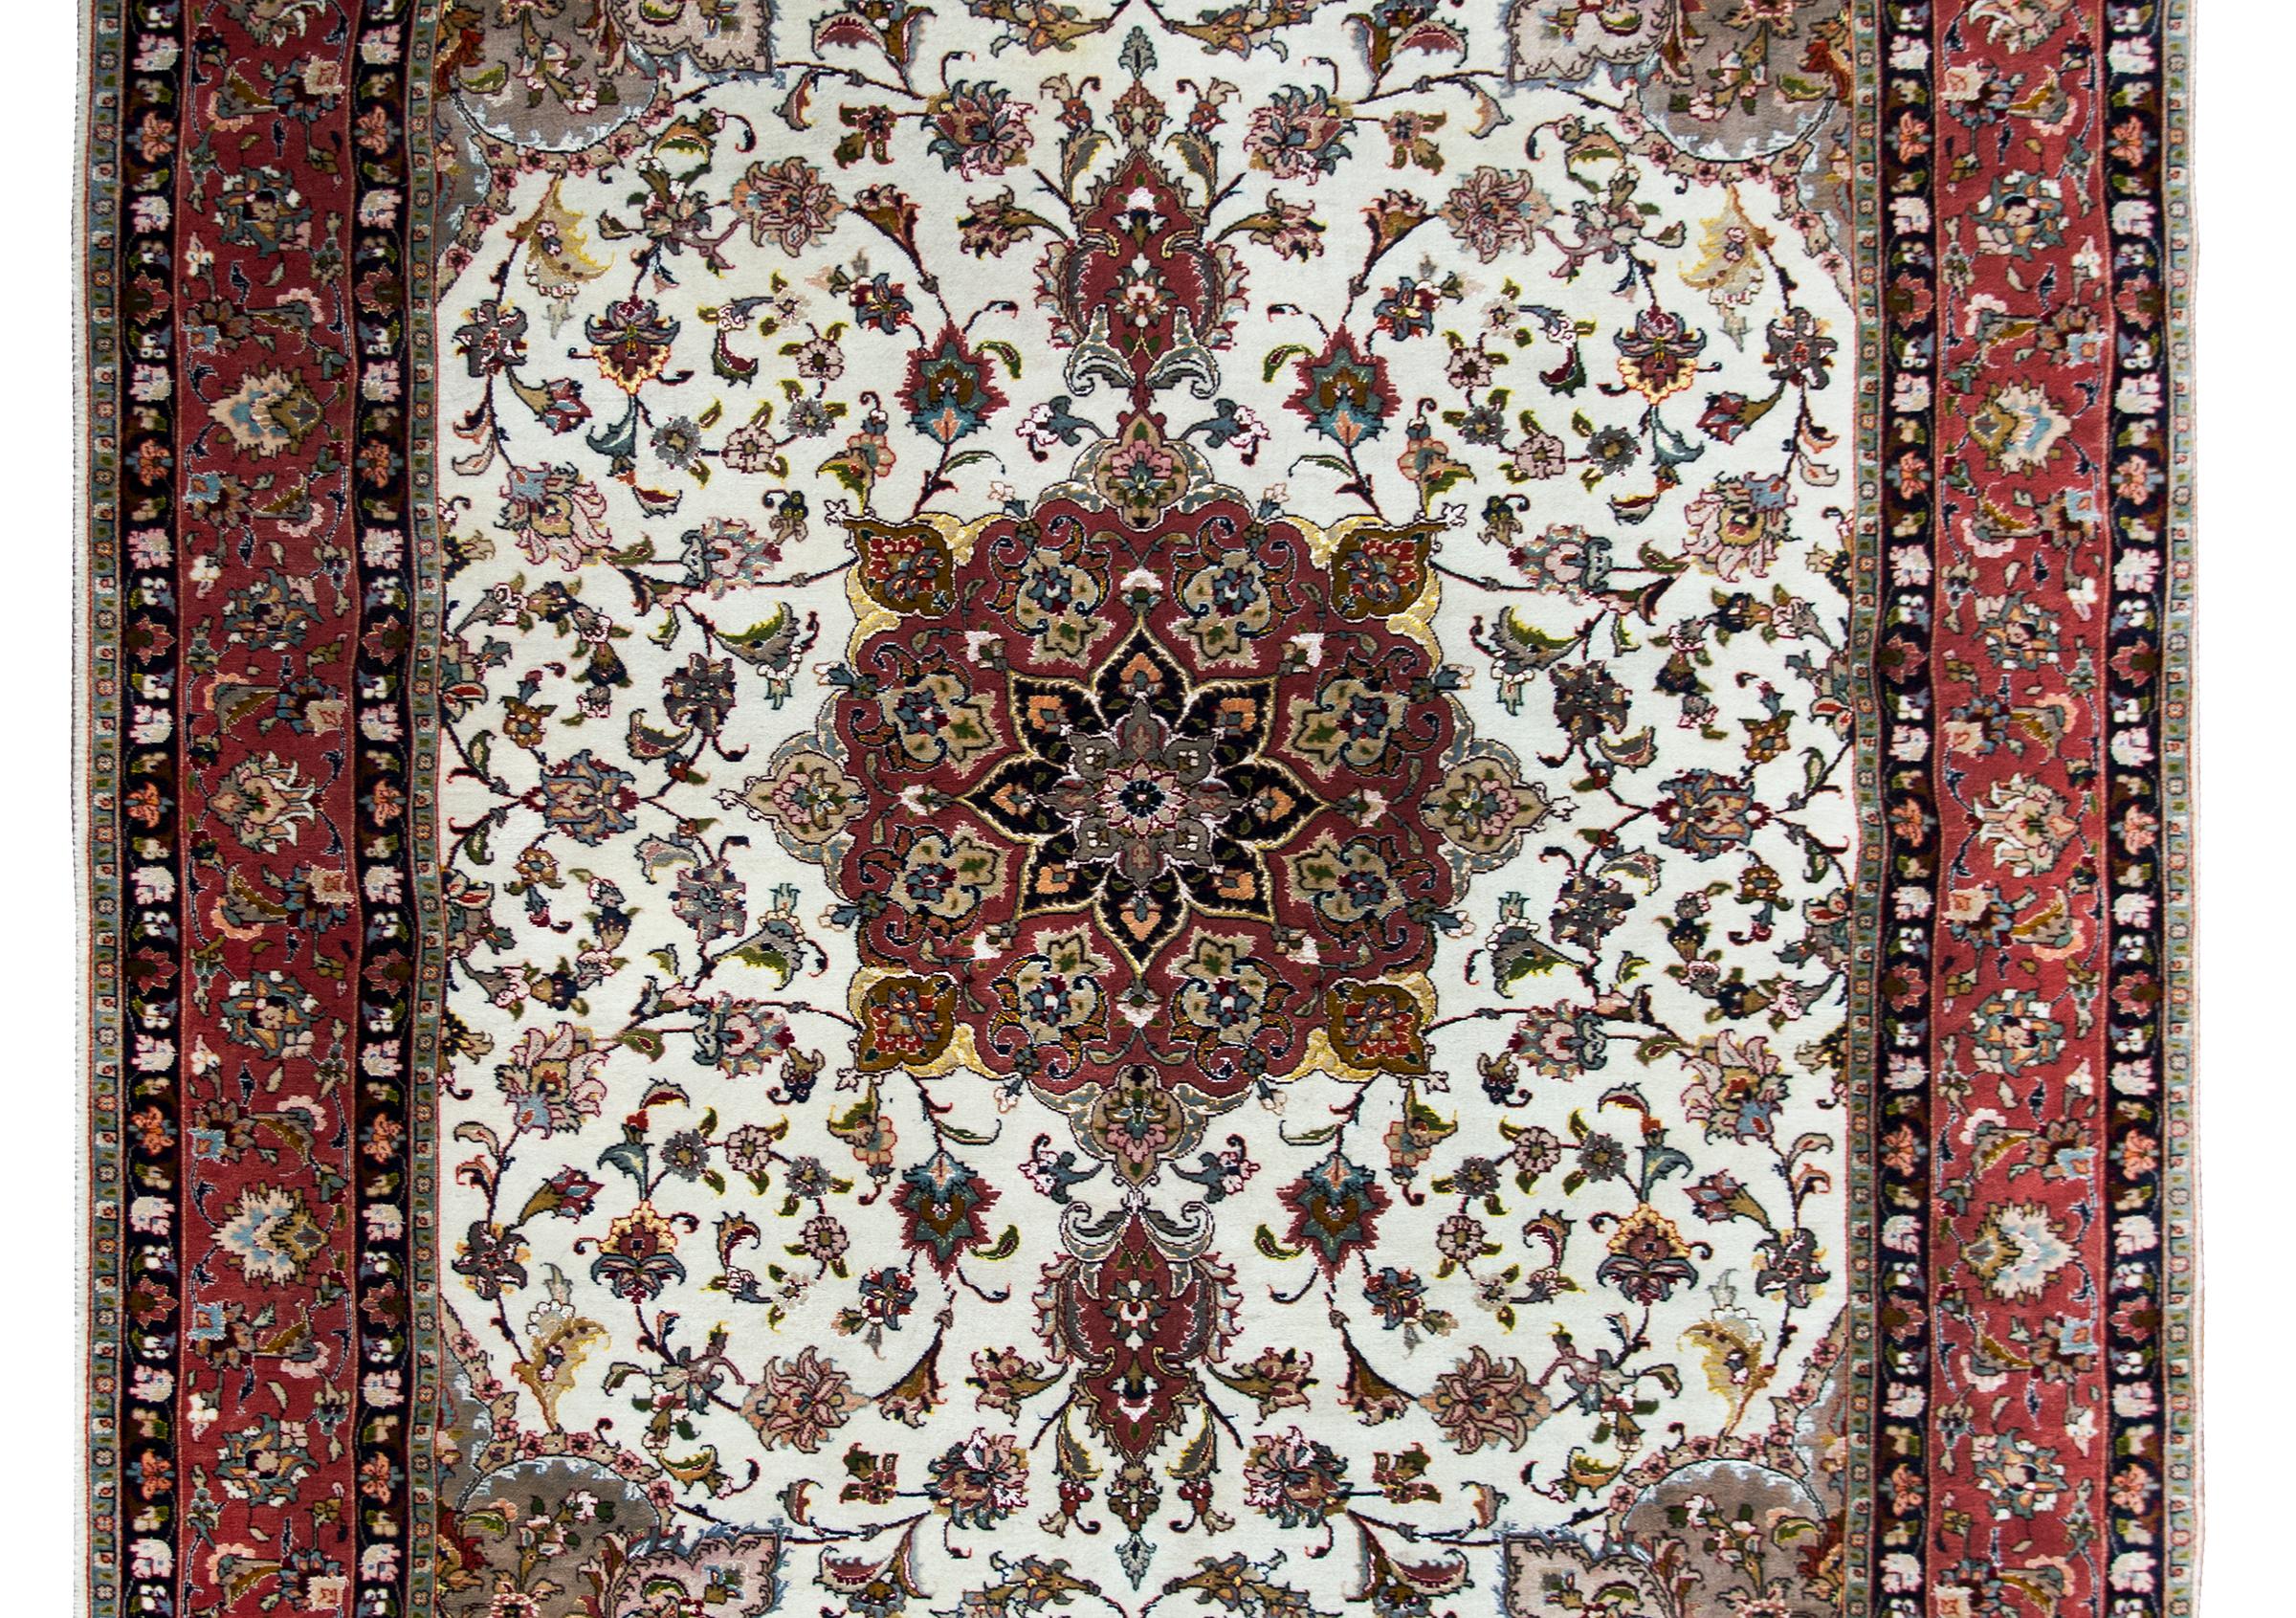 An incredible late 20th century Persian Tabriz hand-knotted silk and wool rug with a large central floral medallion living amidst a field of swirling vines and flowers, and surrounded by a wide floral and leaf patterned border, and all woven in